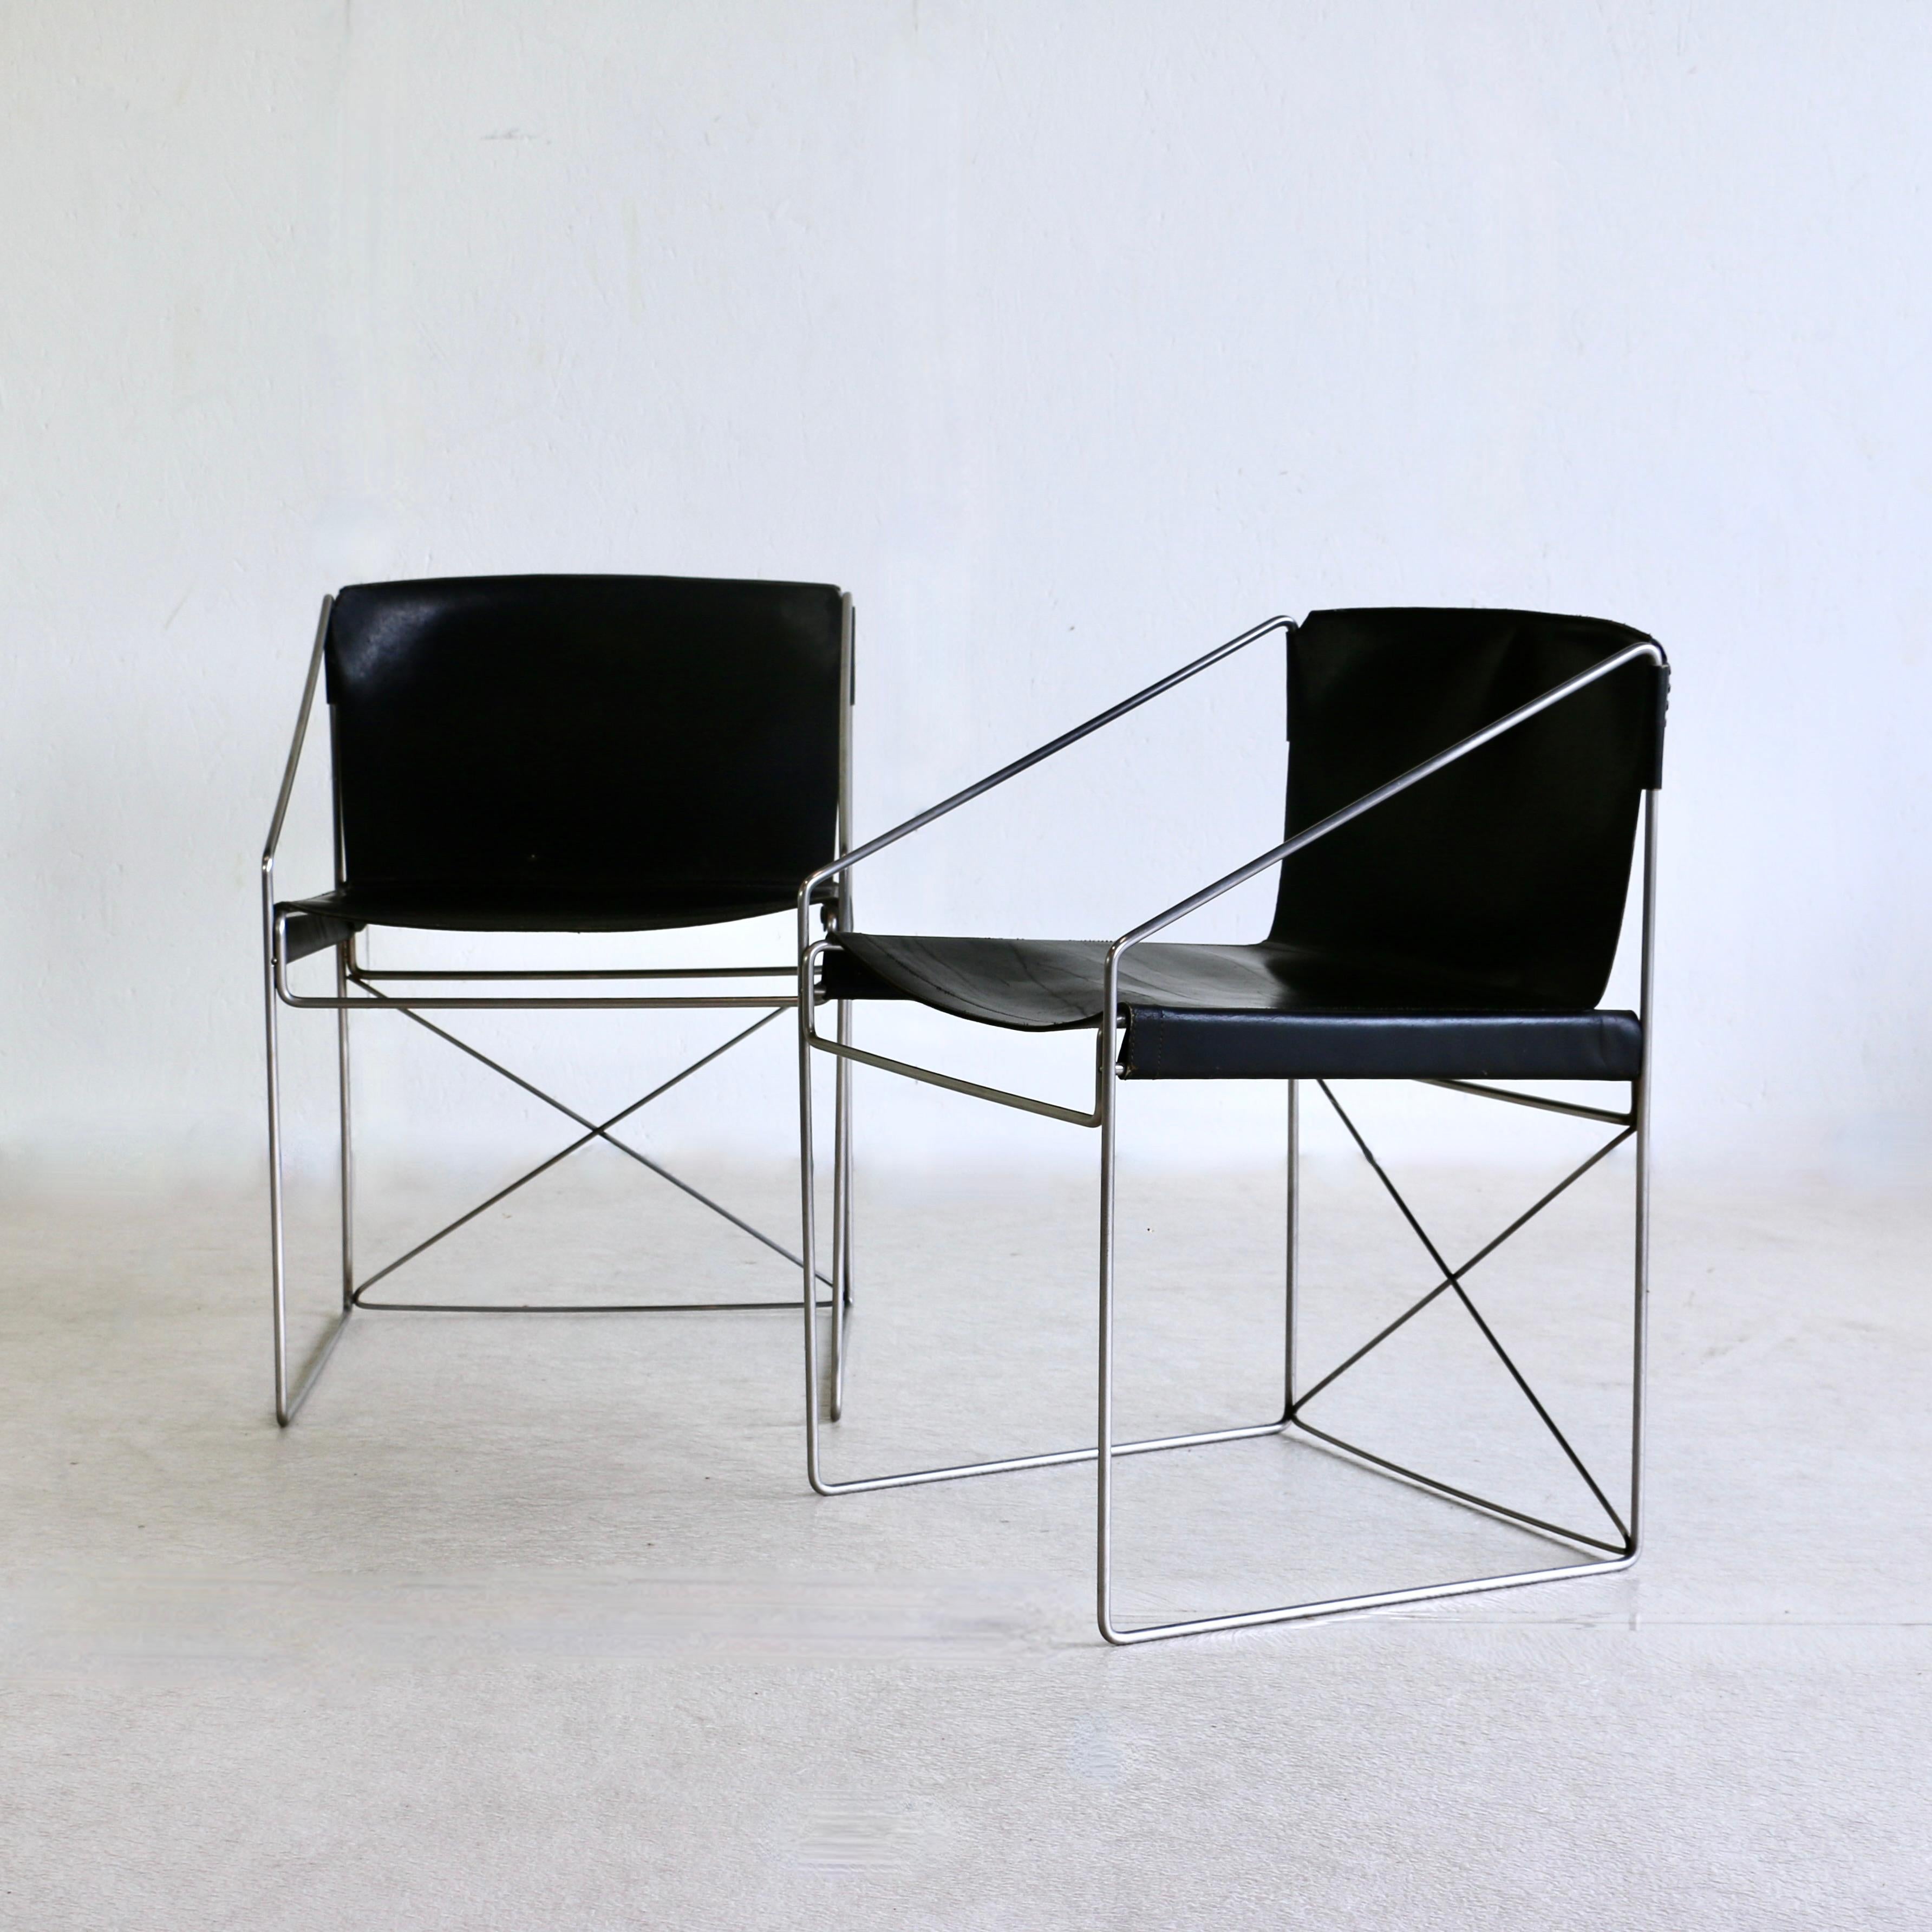 Two pairs of armchairs with matt chromed iron legs and black leather seats. Italy, 1980s.